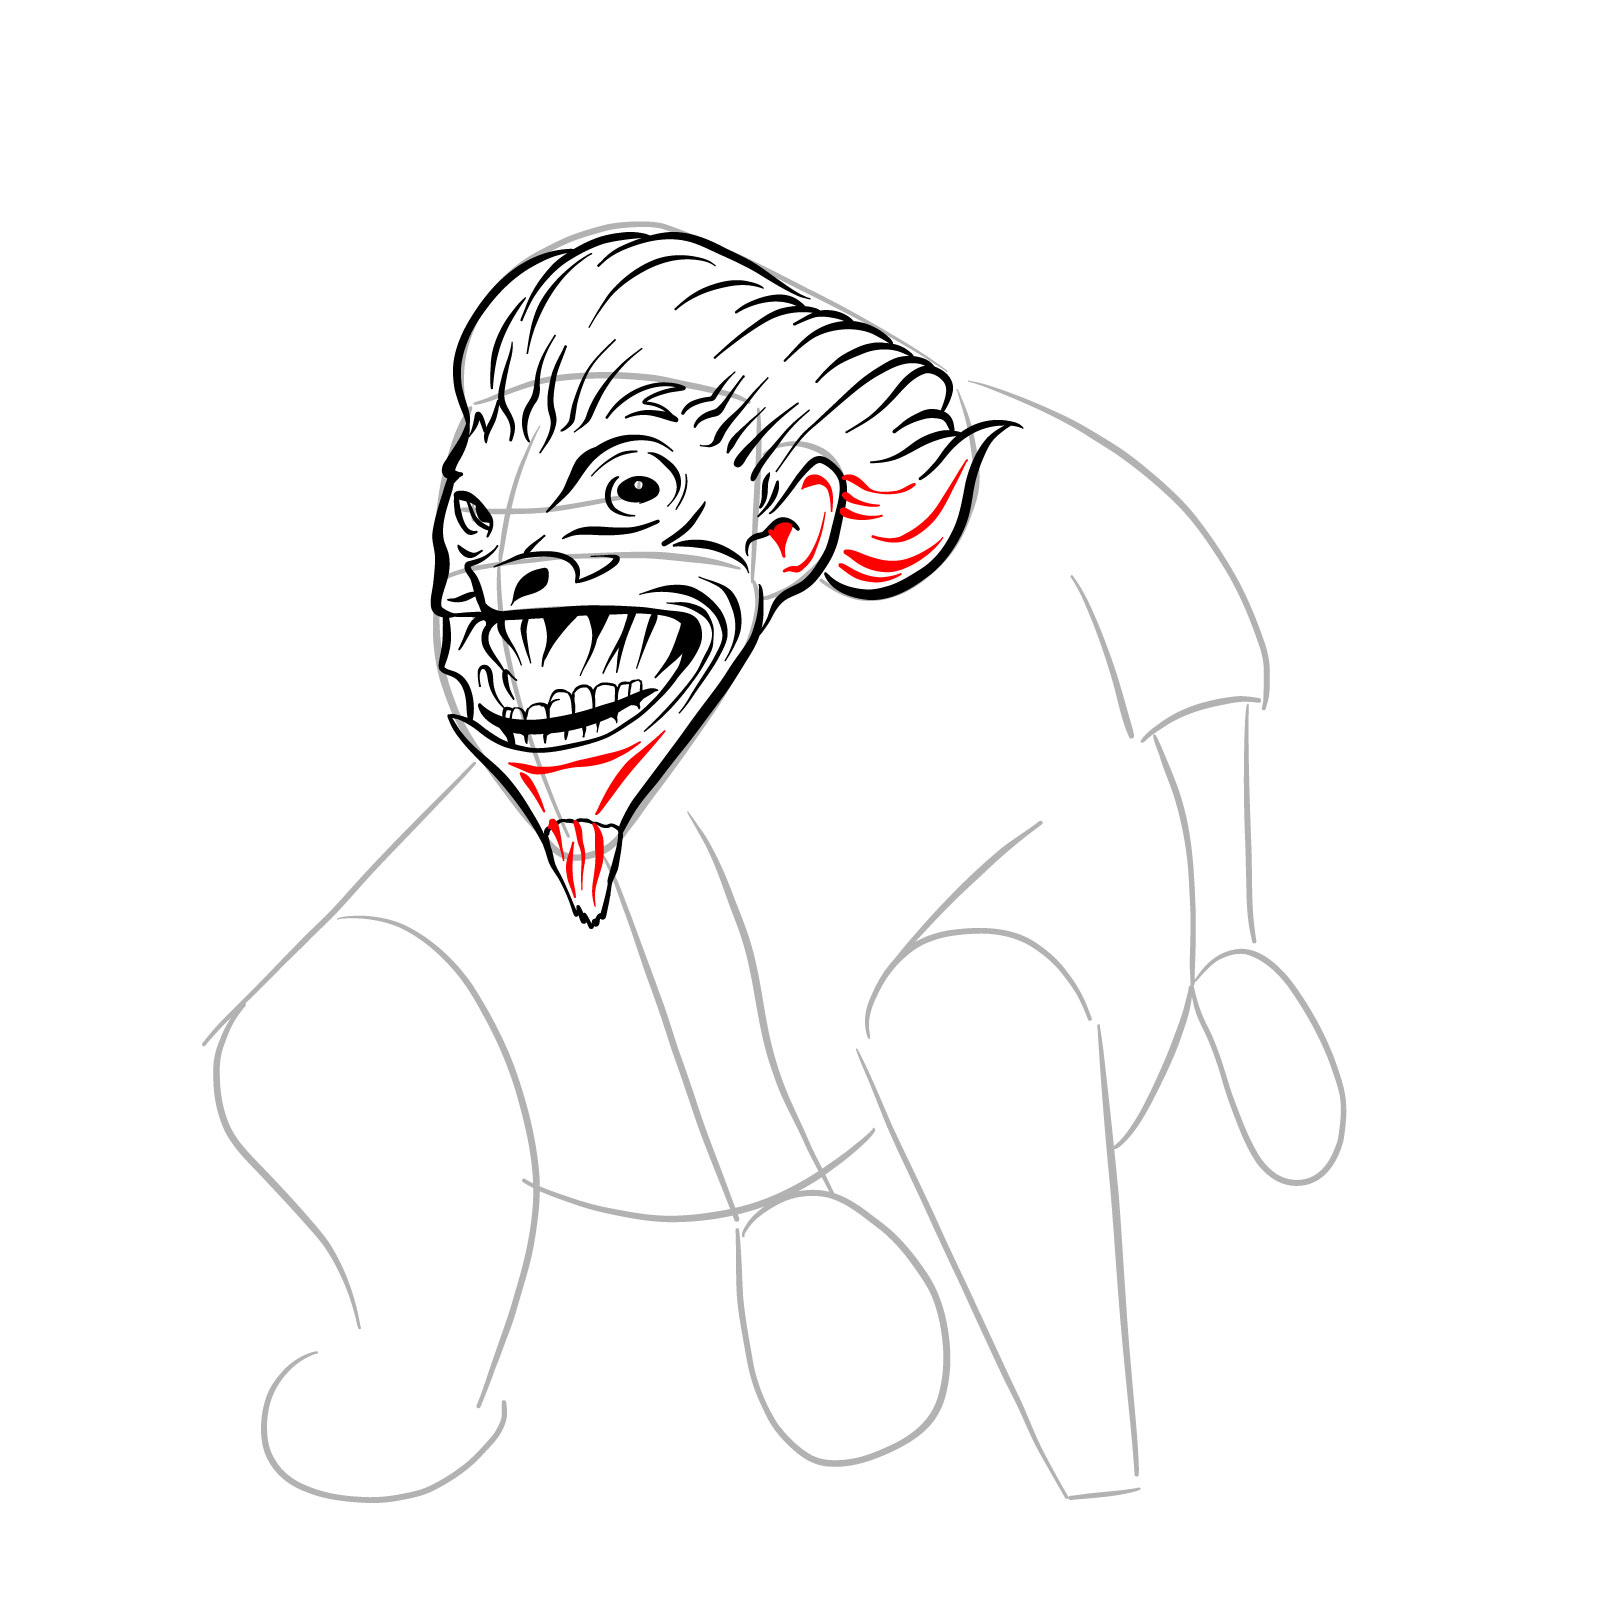 How to draw a Boggart - step 17